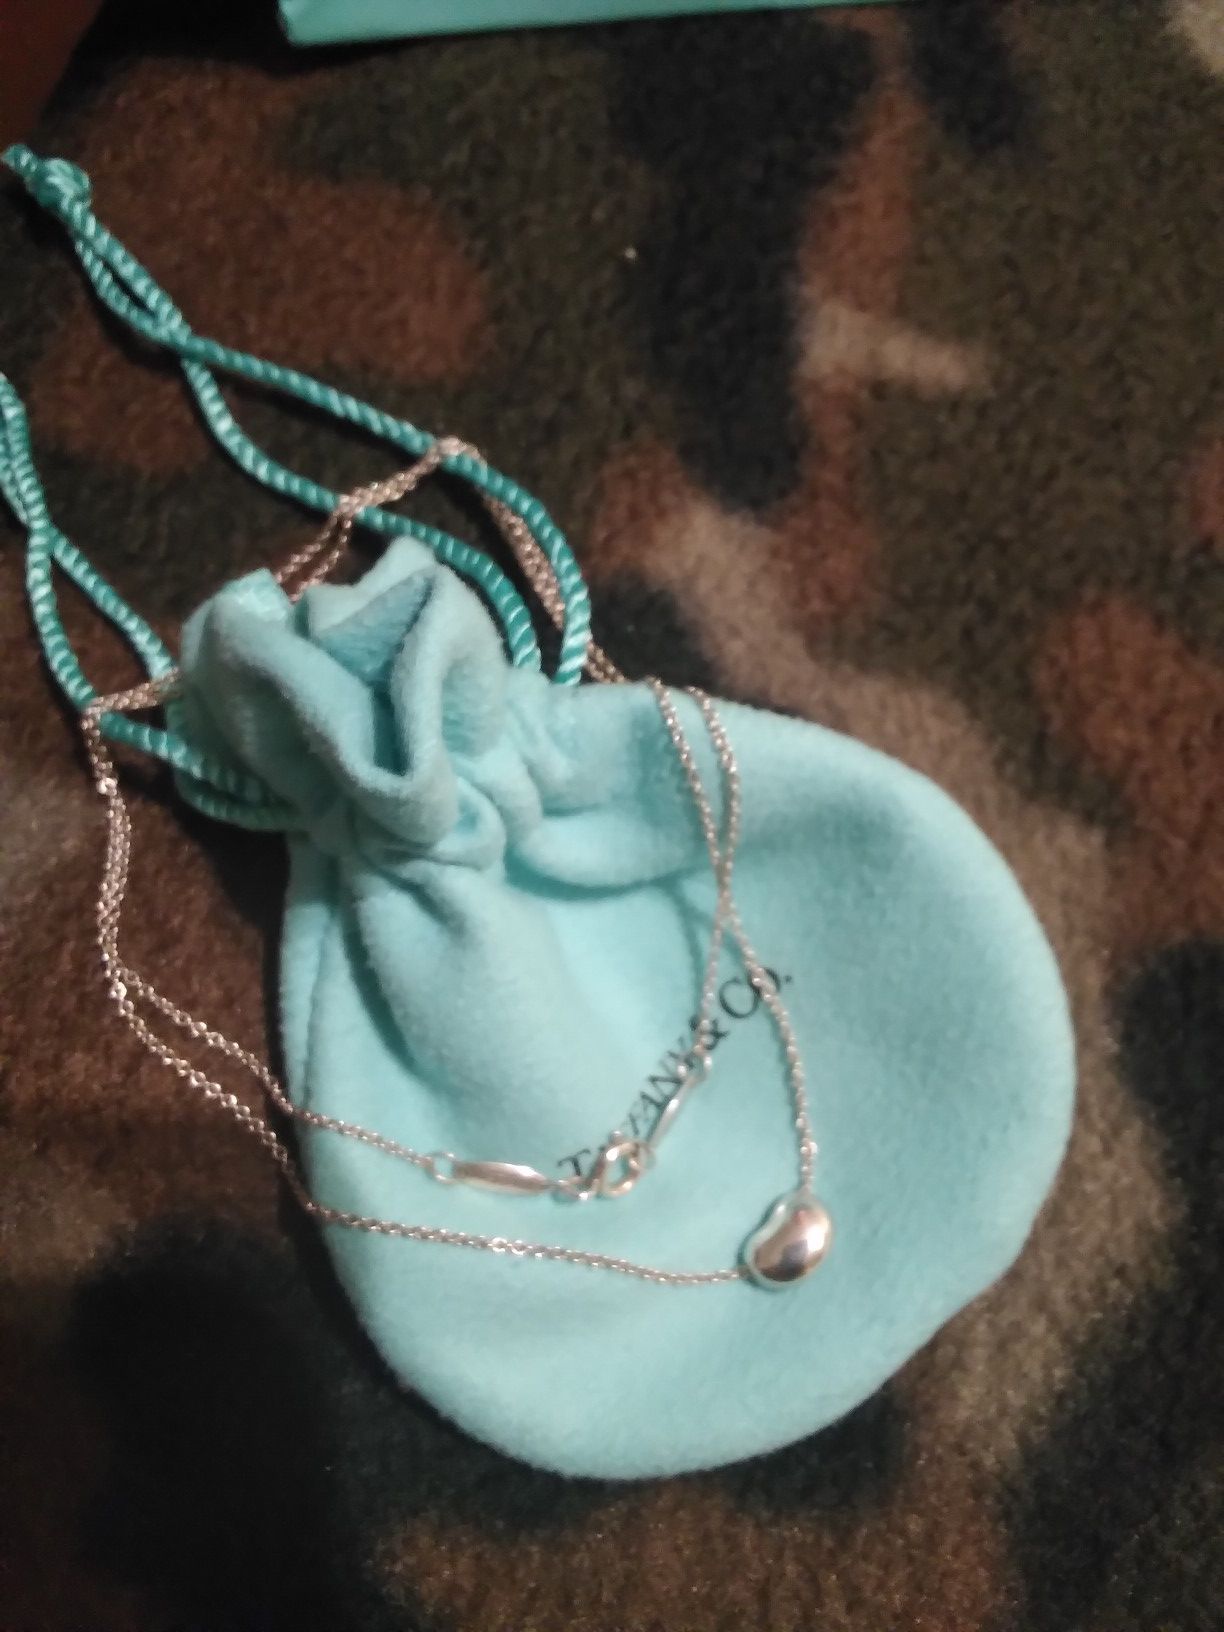 SOLD. Tiffany & Co Jewelry. mini bean necklace 18 1/2 inch...if you see, it's available :)